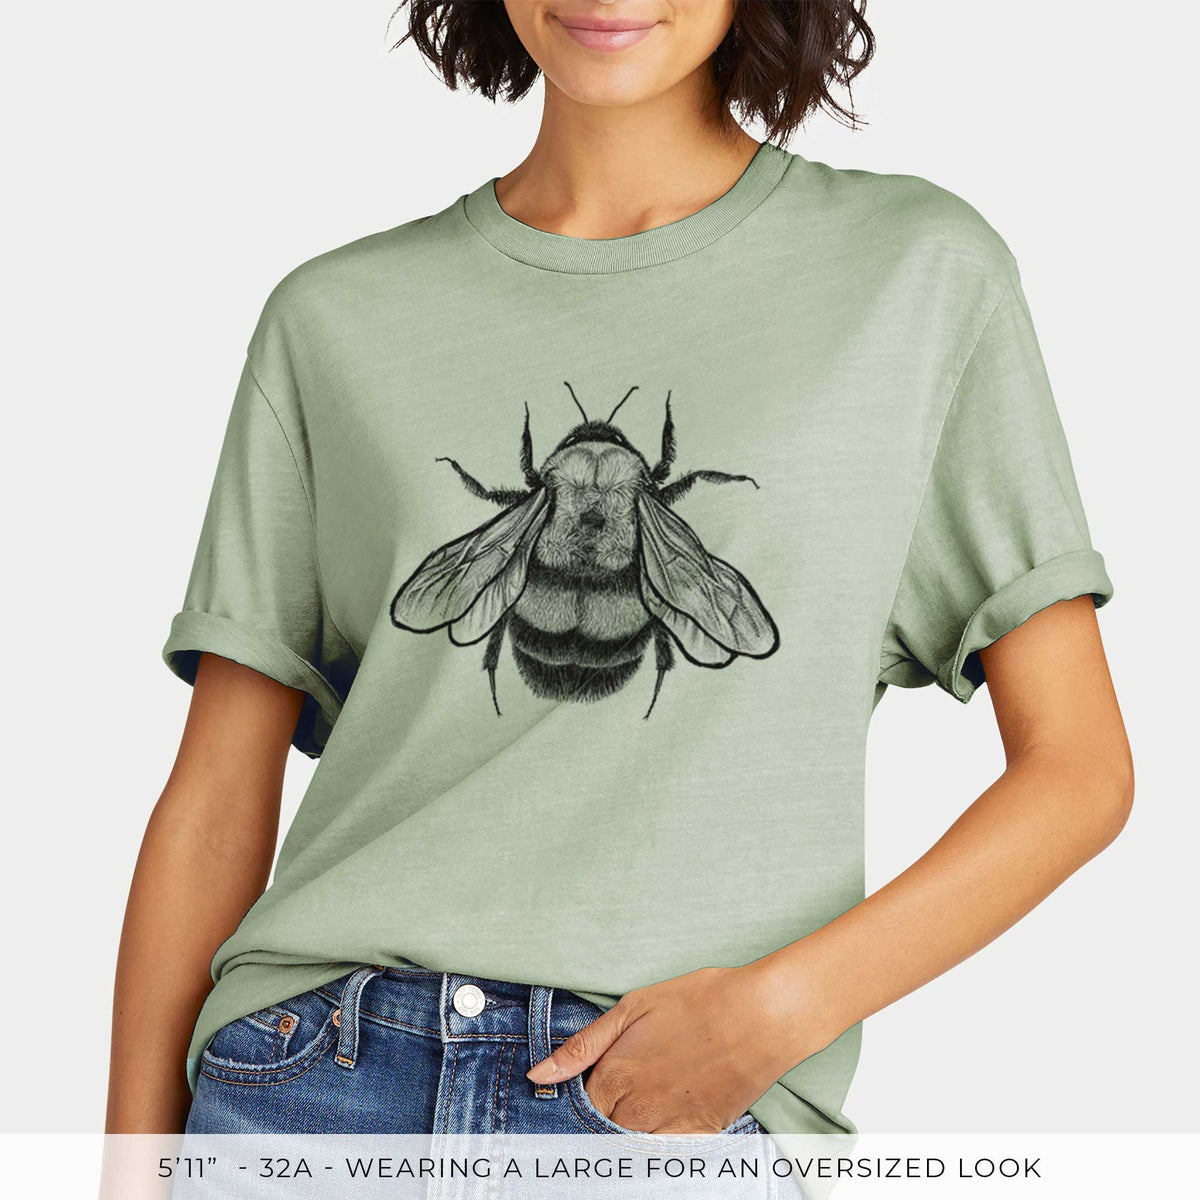 Bombus Affinis - Rusty-Patched Bumble Bee -  Mineral Wash 100% Organic Cotton Short Sleeve